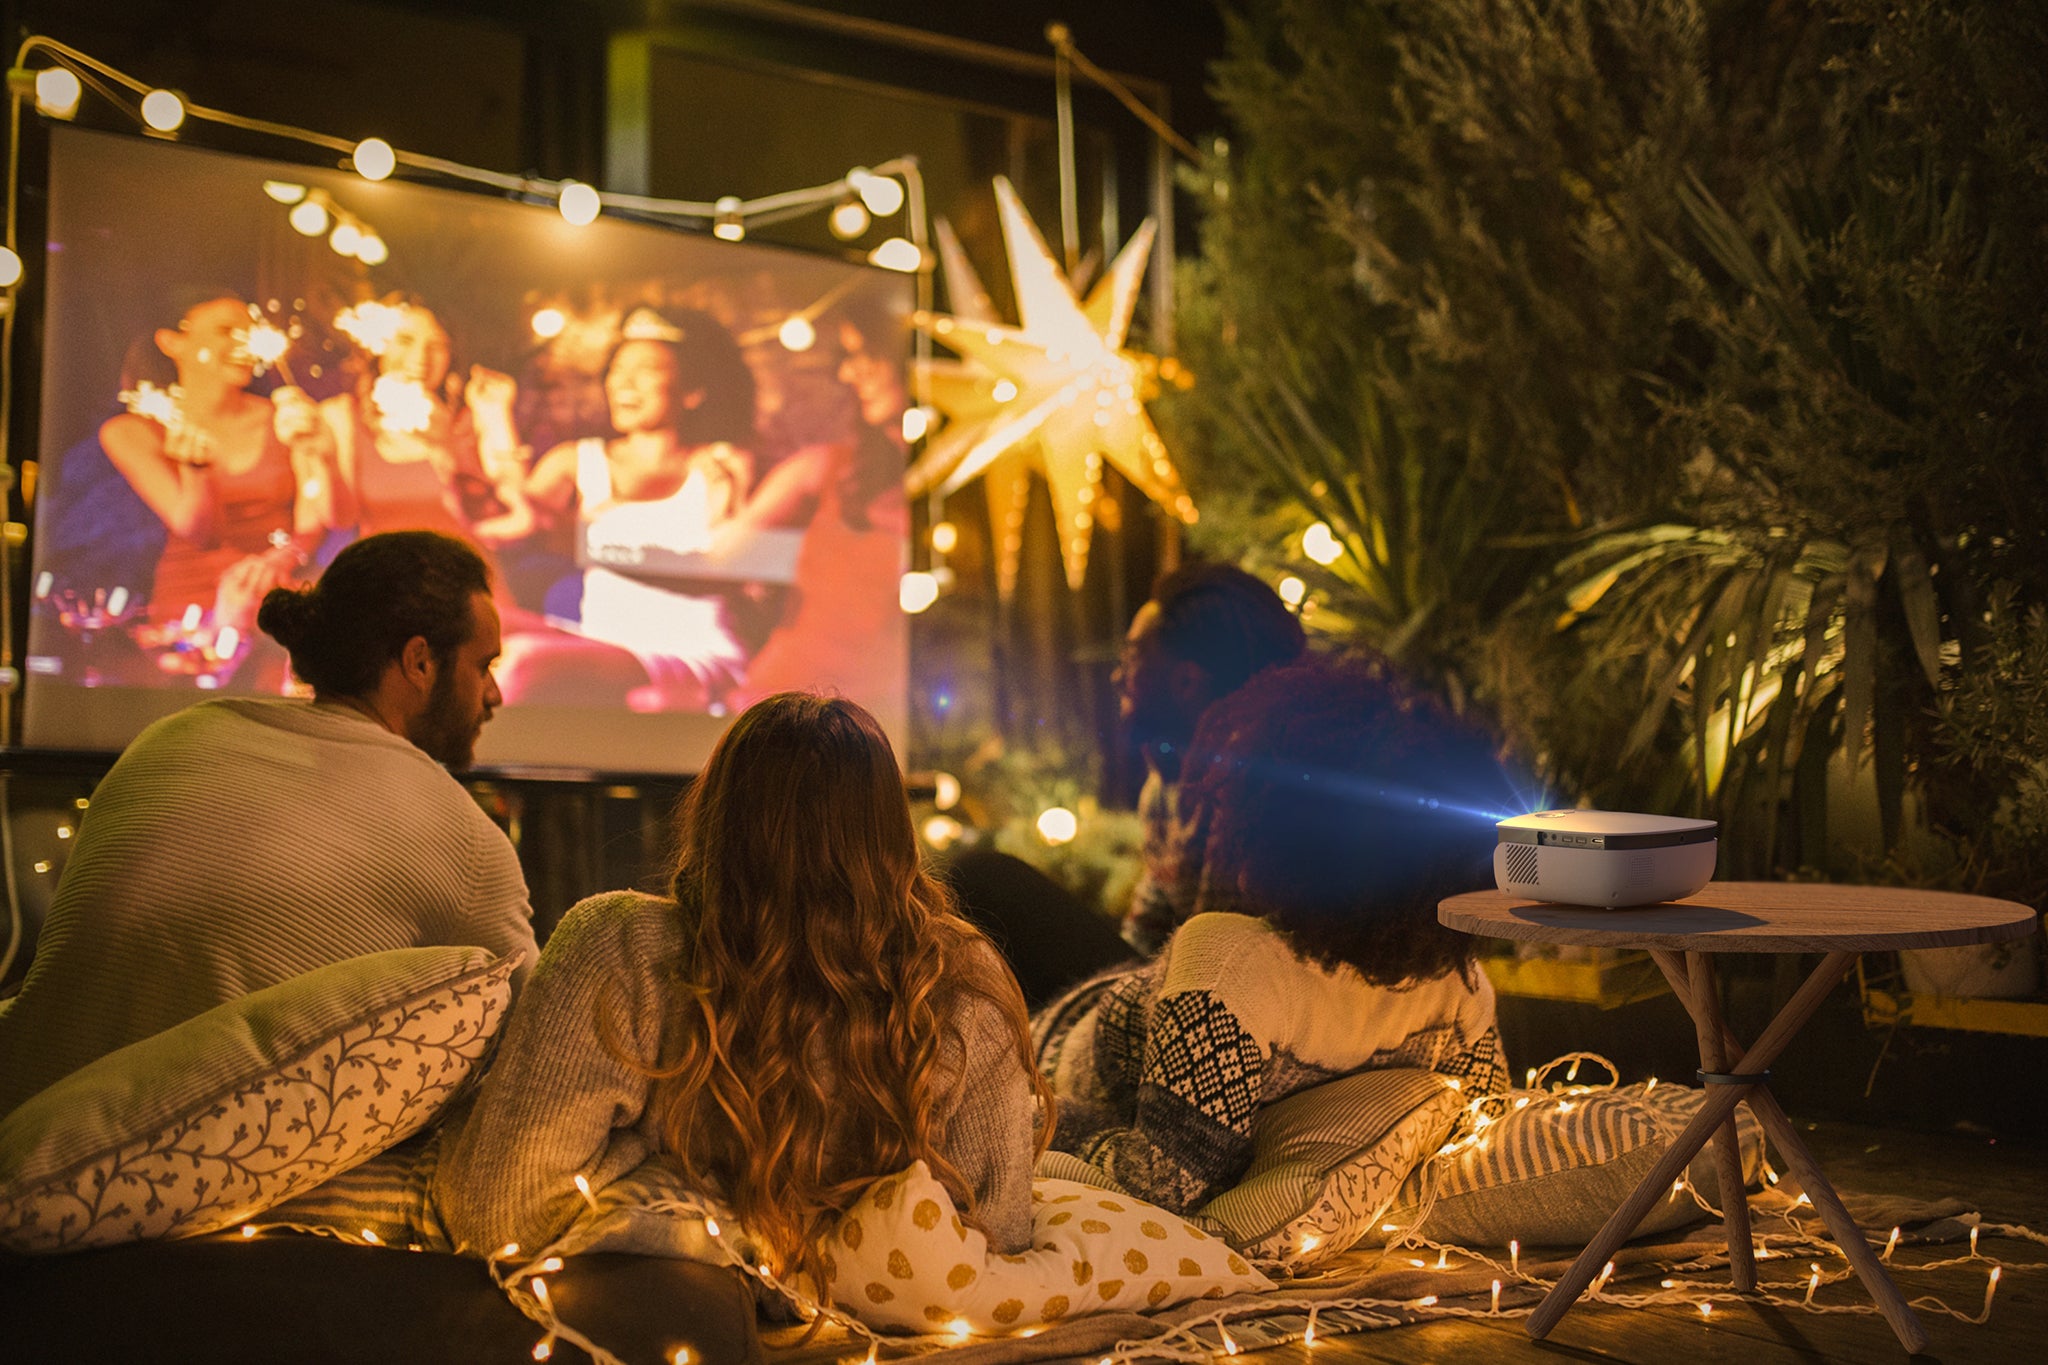 Have an epic outdoor movie party with your friends!